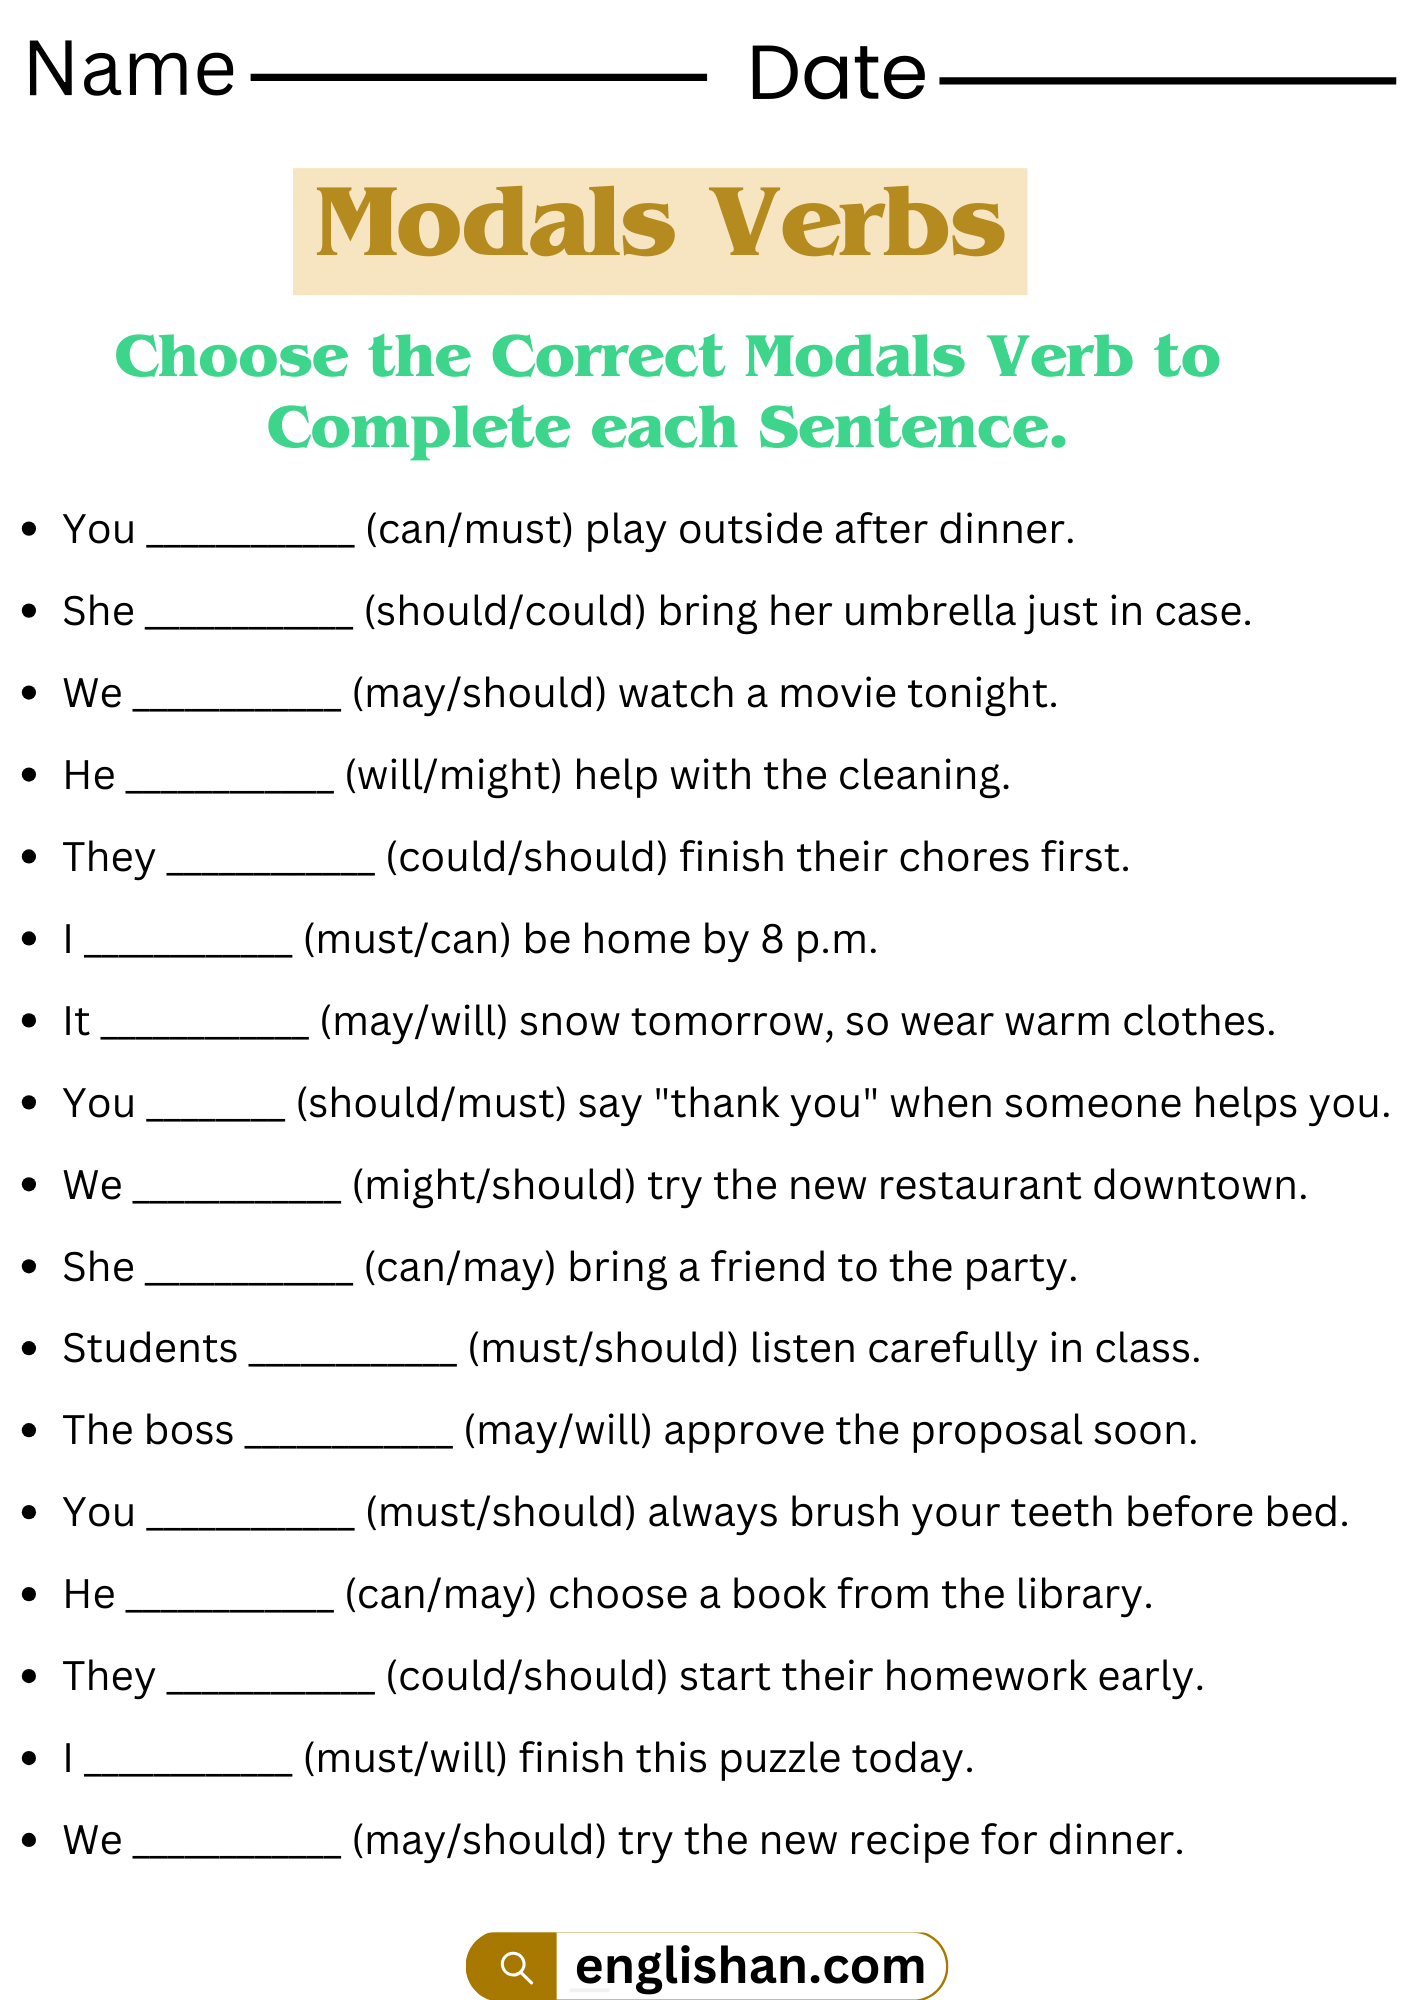 Choose the Correct Modals Verbs to Complete each Sentence. Modals Verbs Worksheets. 